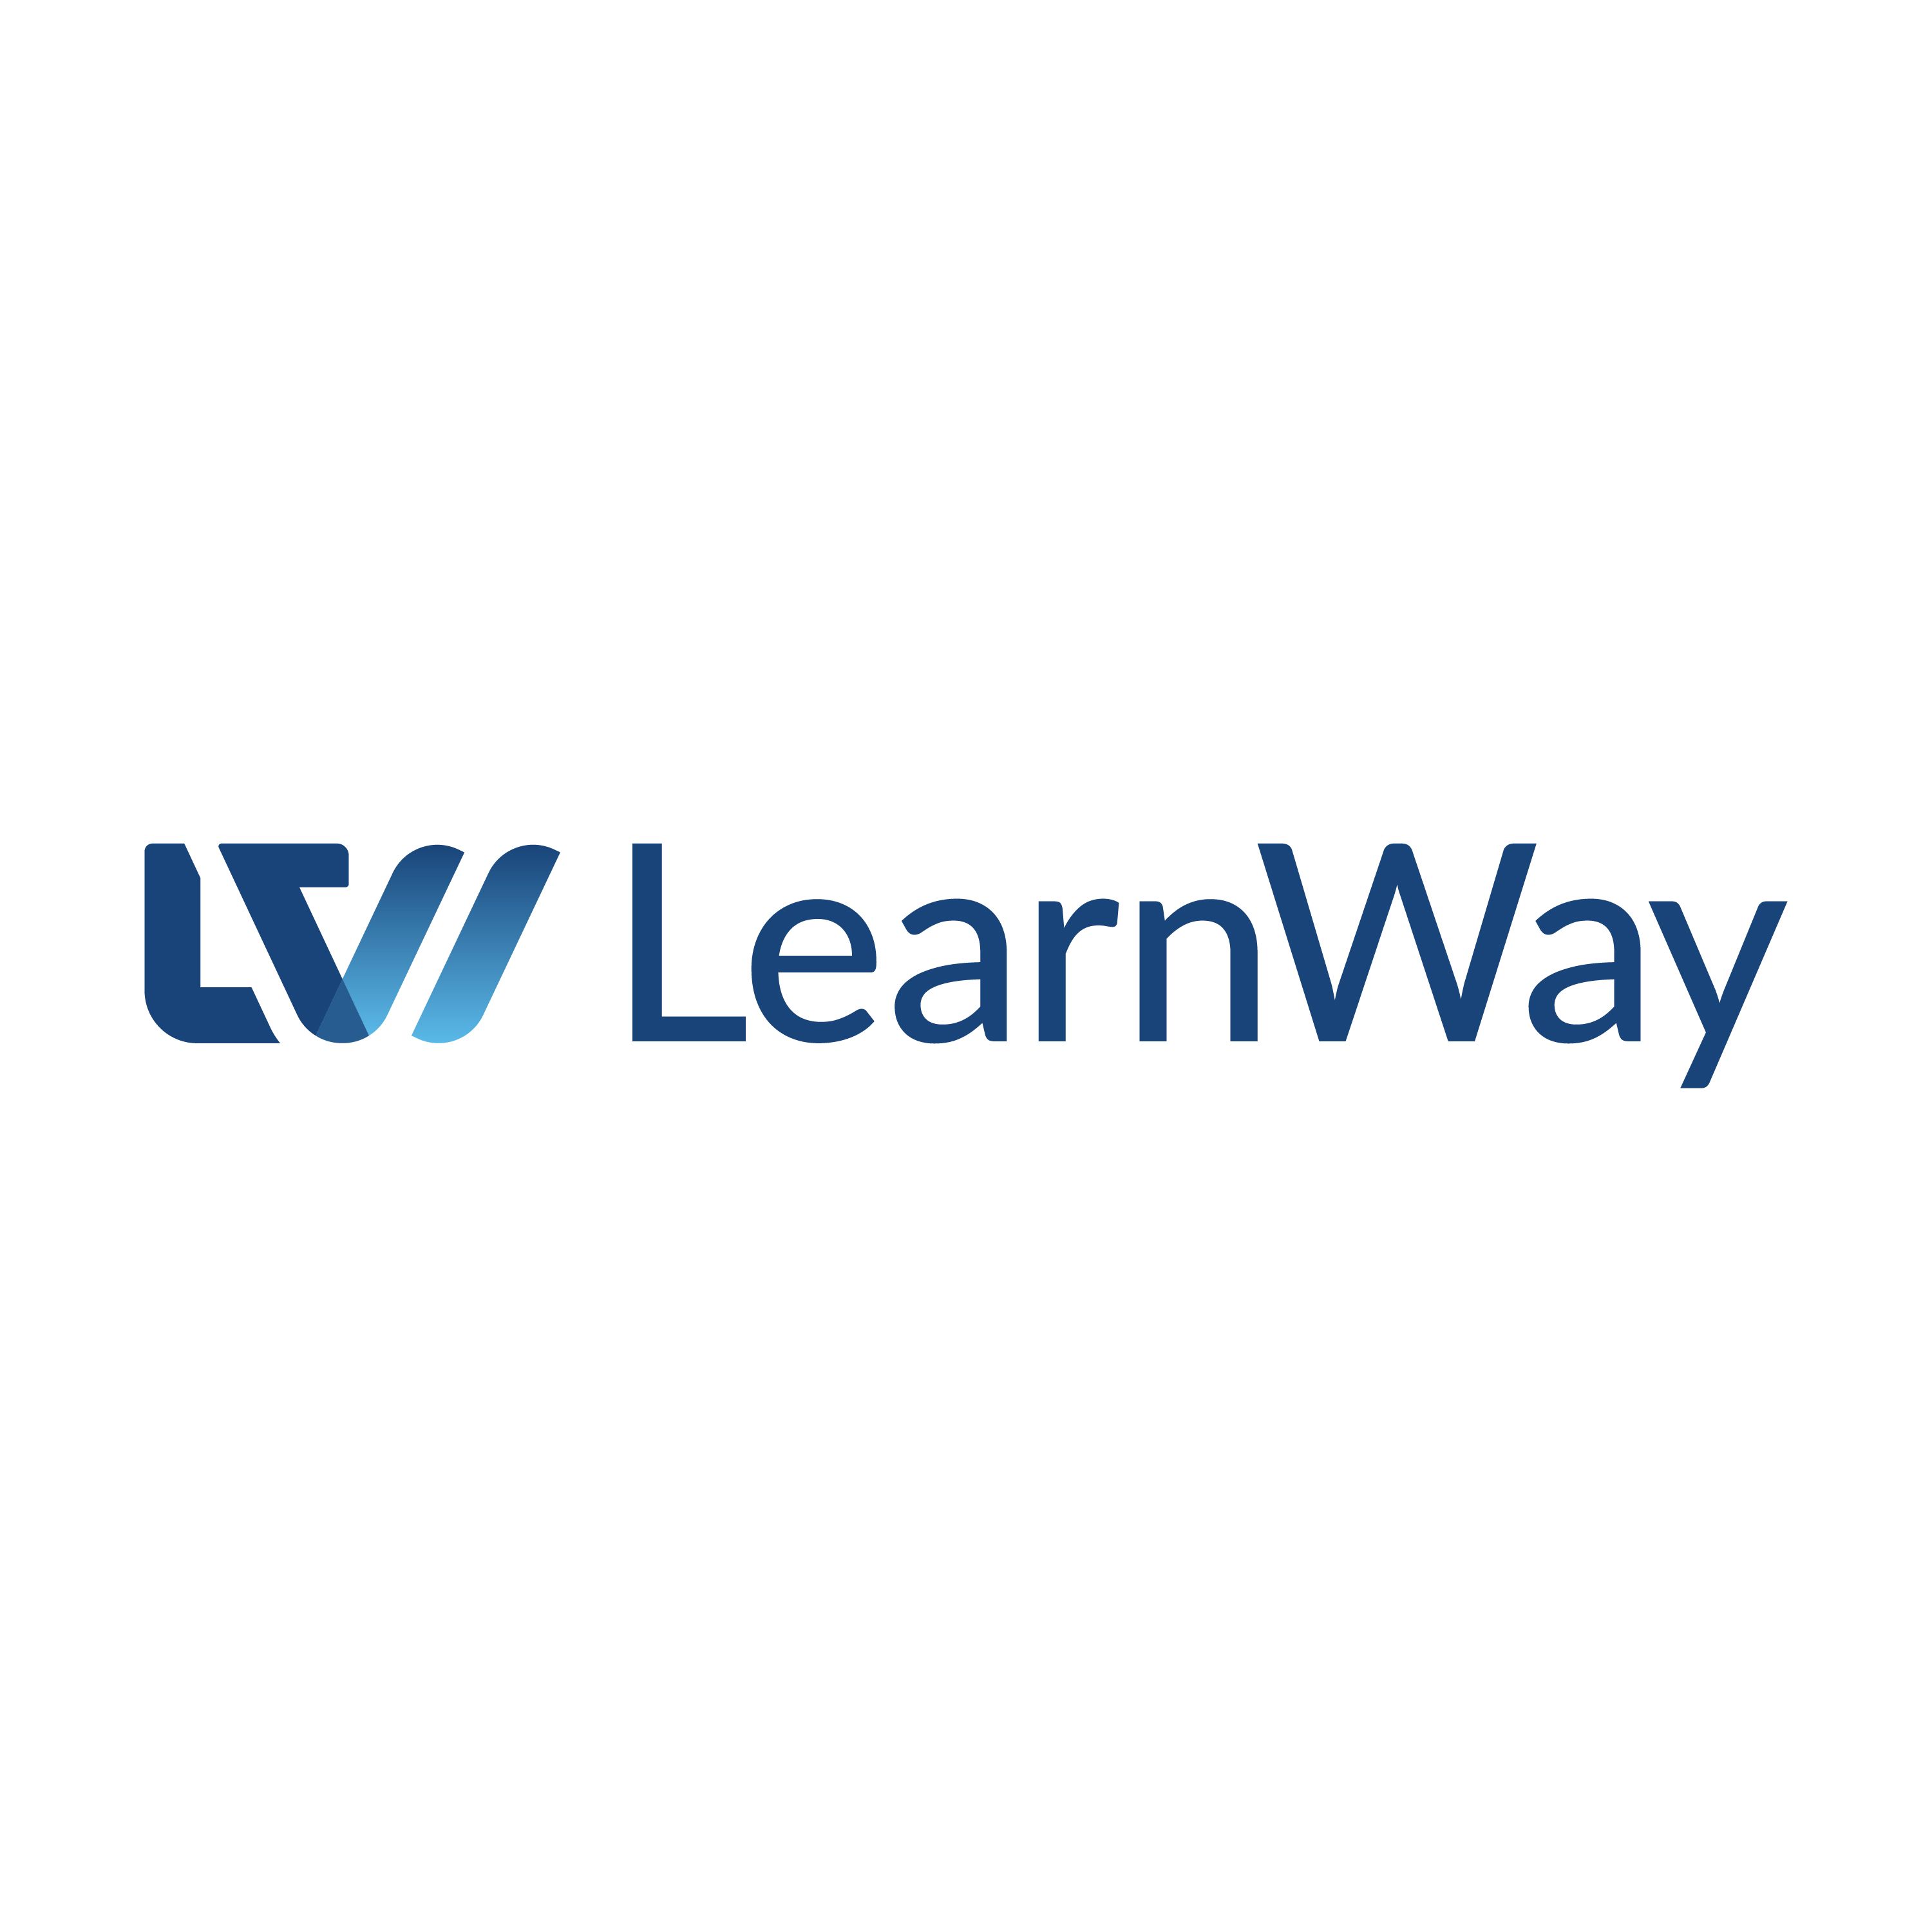 LearnWay powered by Gromar